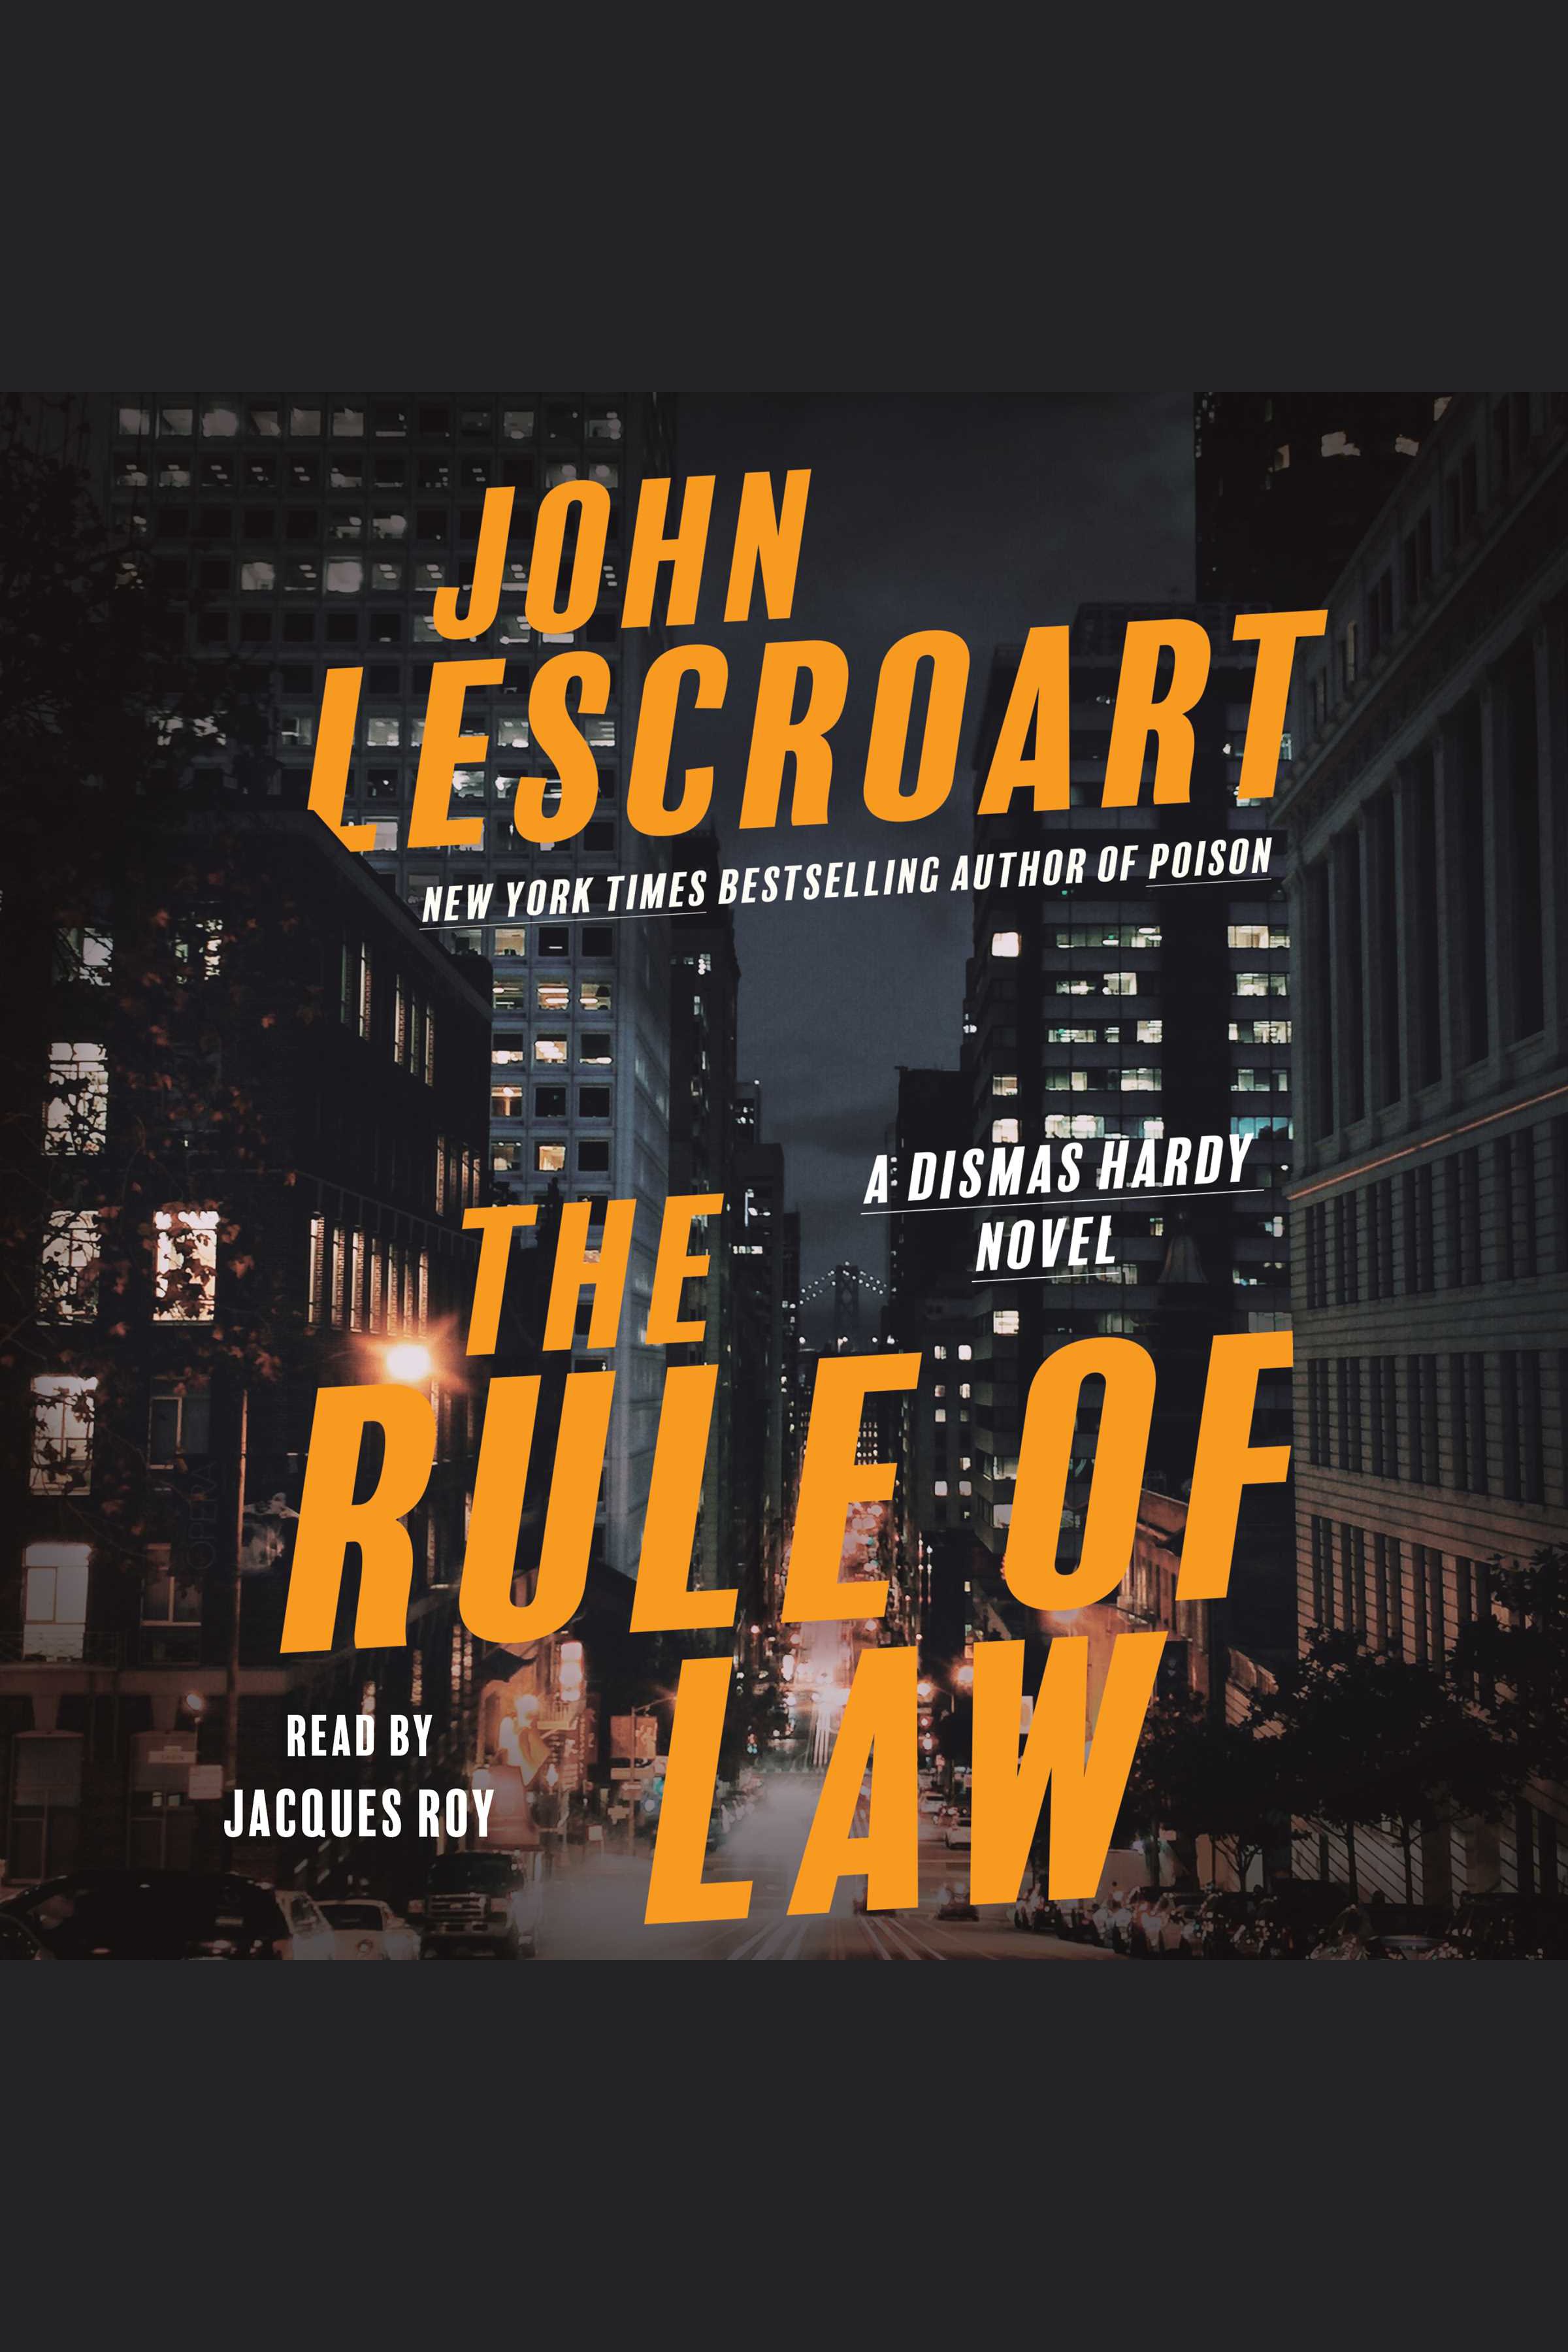 The rule of law cover image